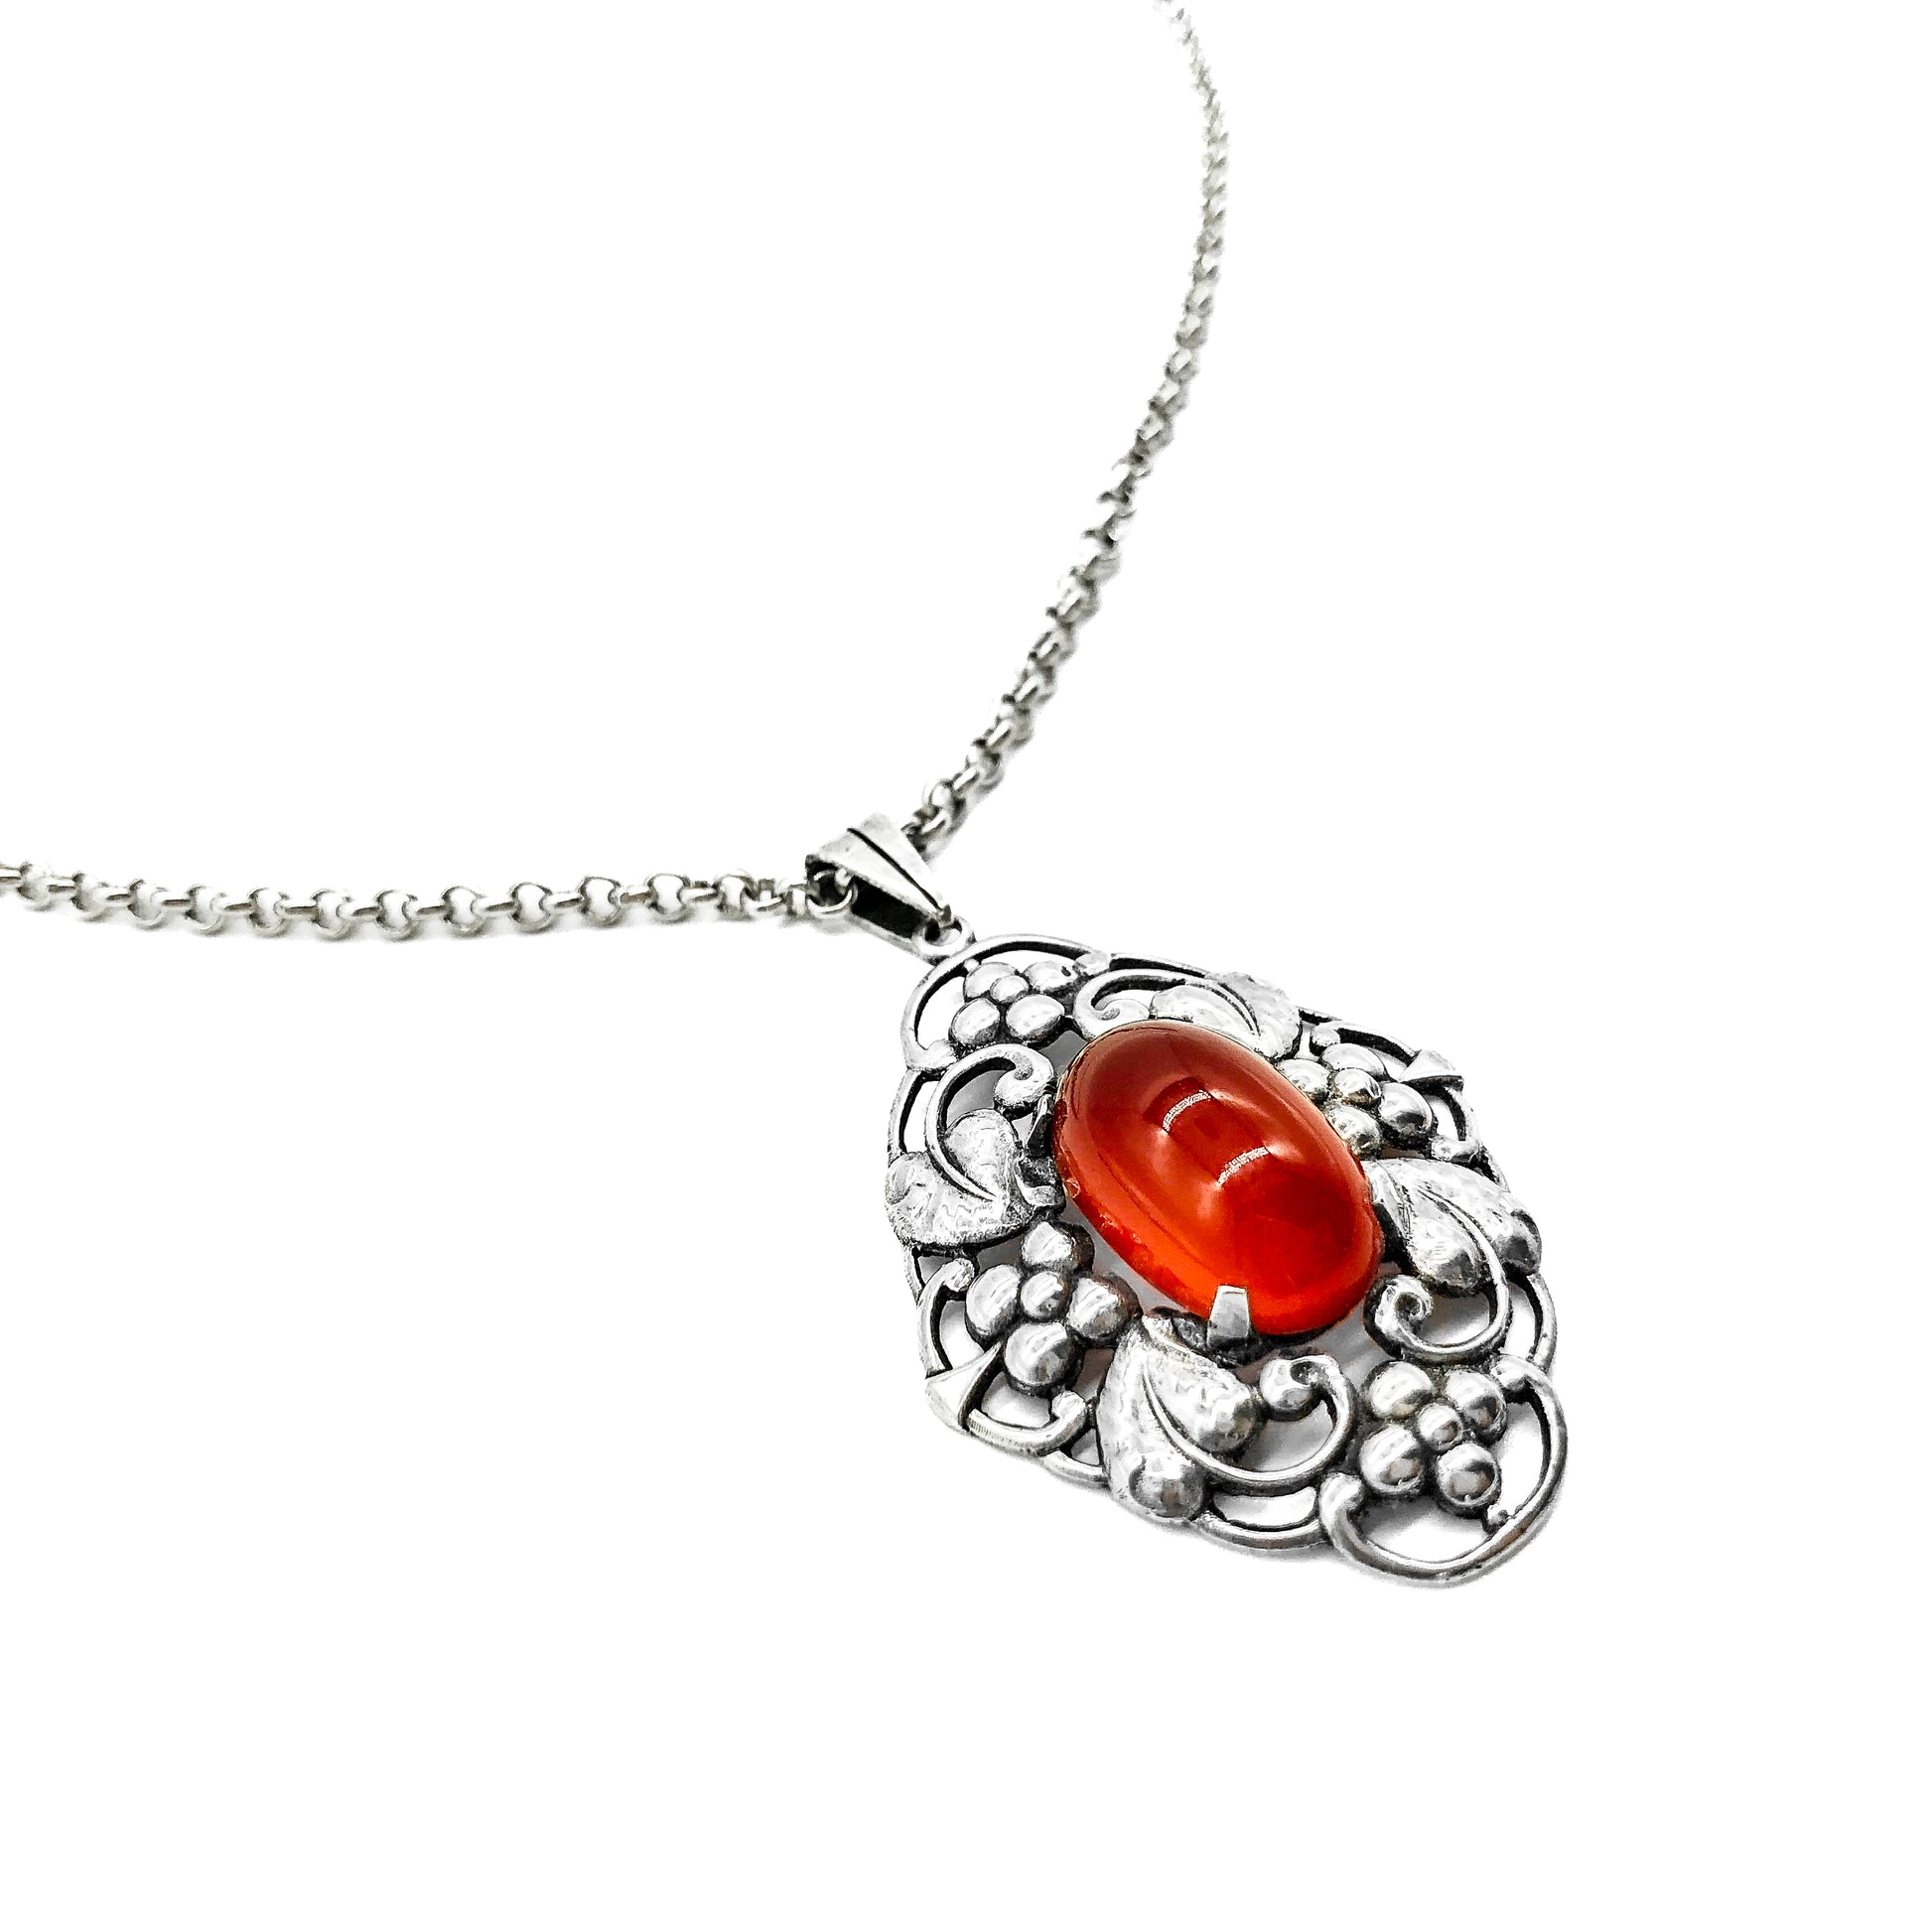 Lovely silver Arts and Crafts pendant set with an oval cabochon carnelian, on a vintage silver chain. Circa 1910